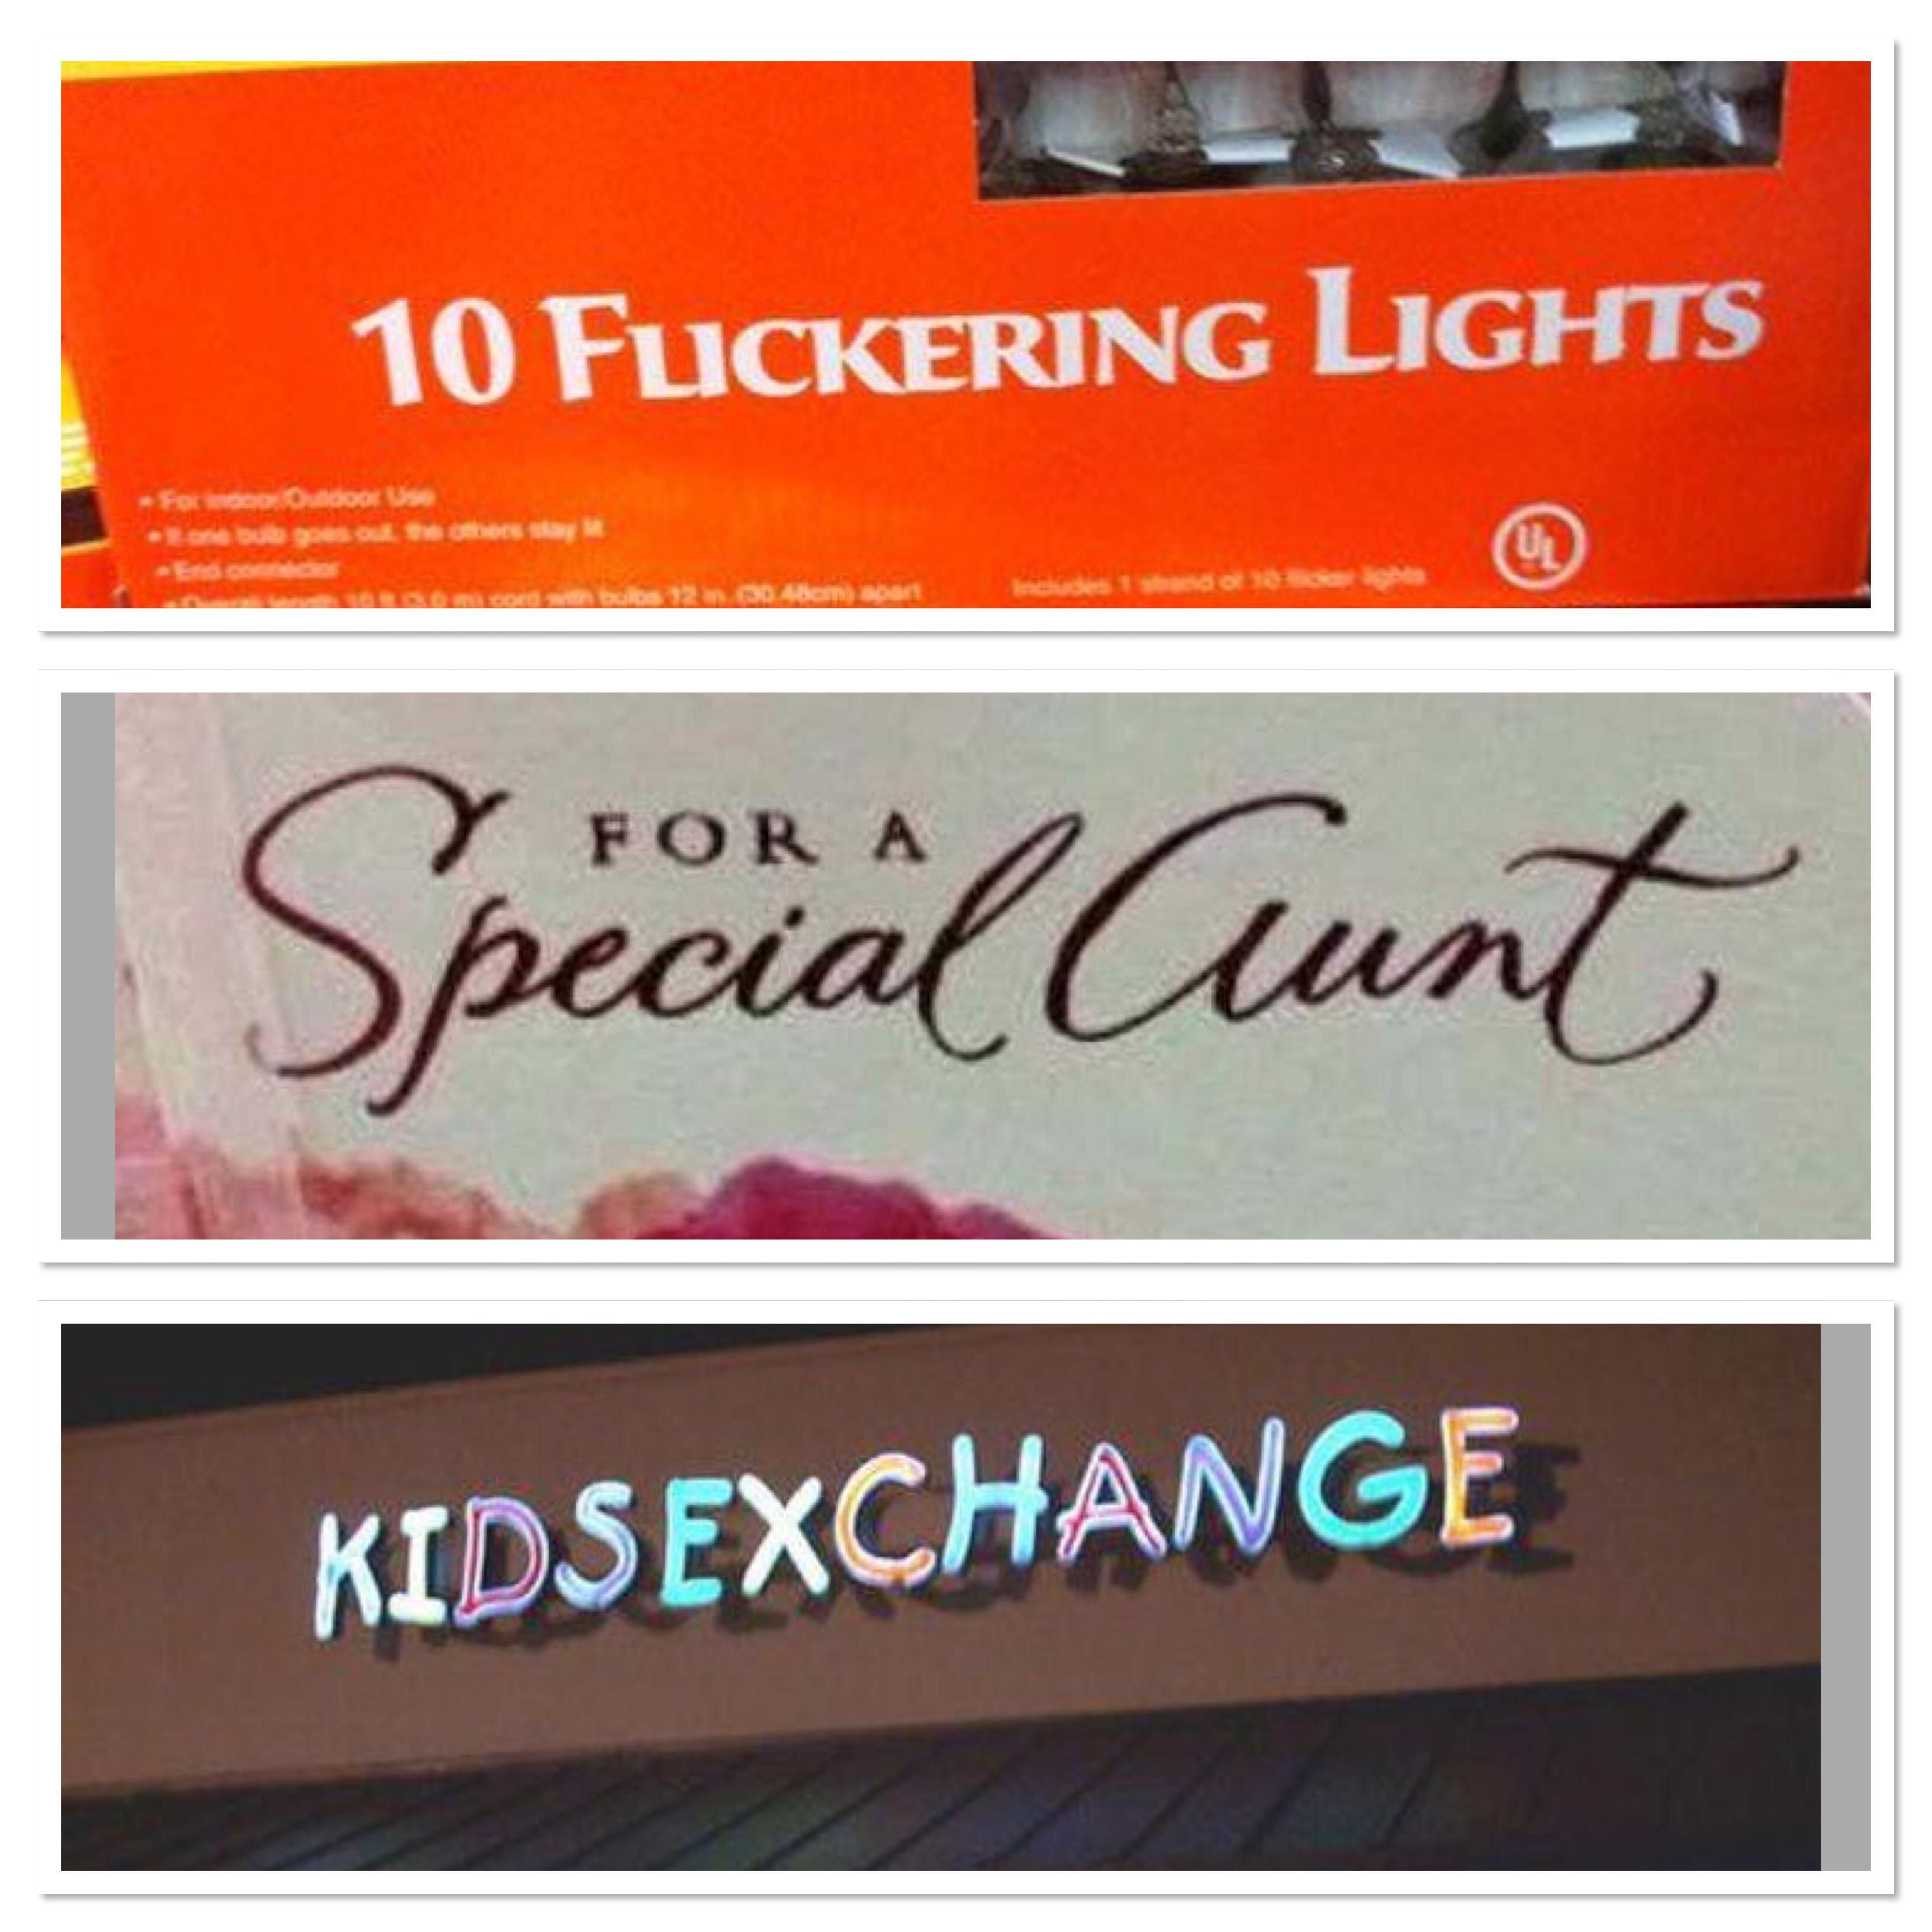 Poor font choices ...